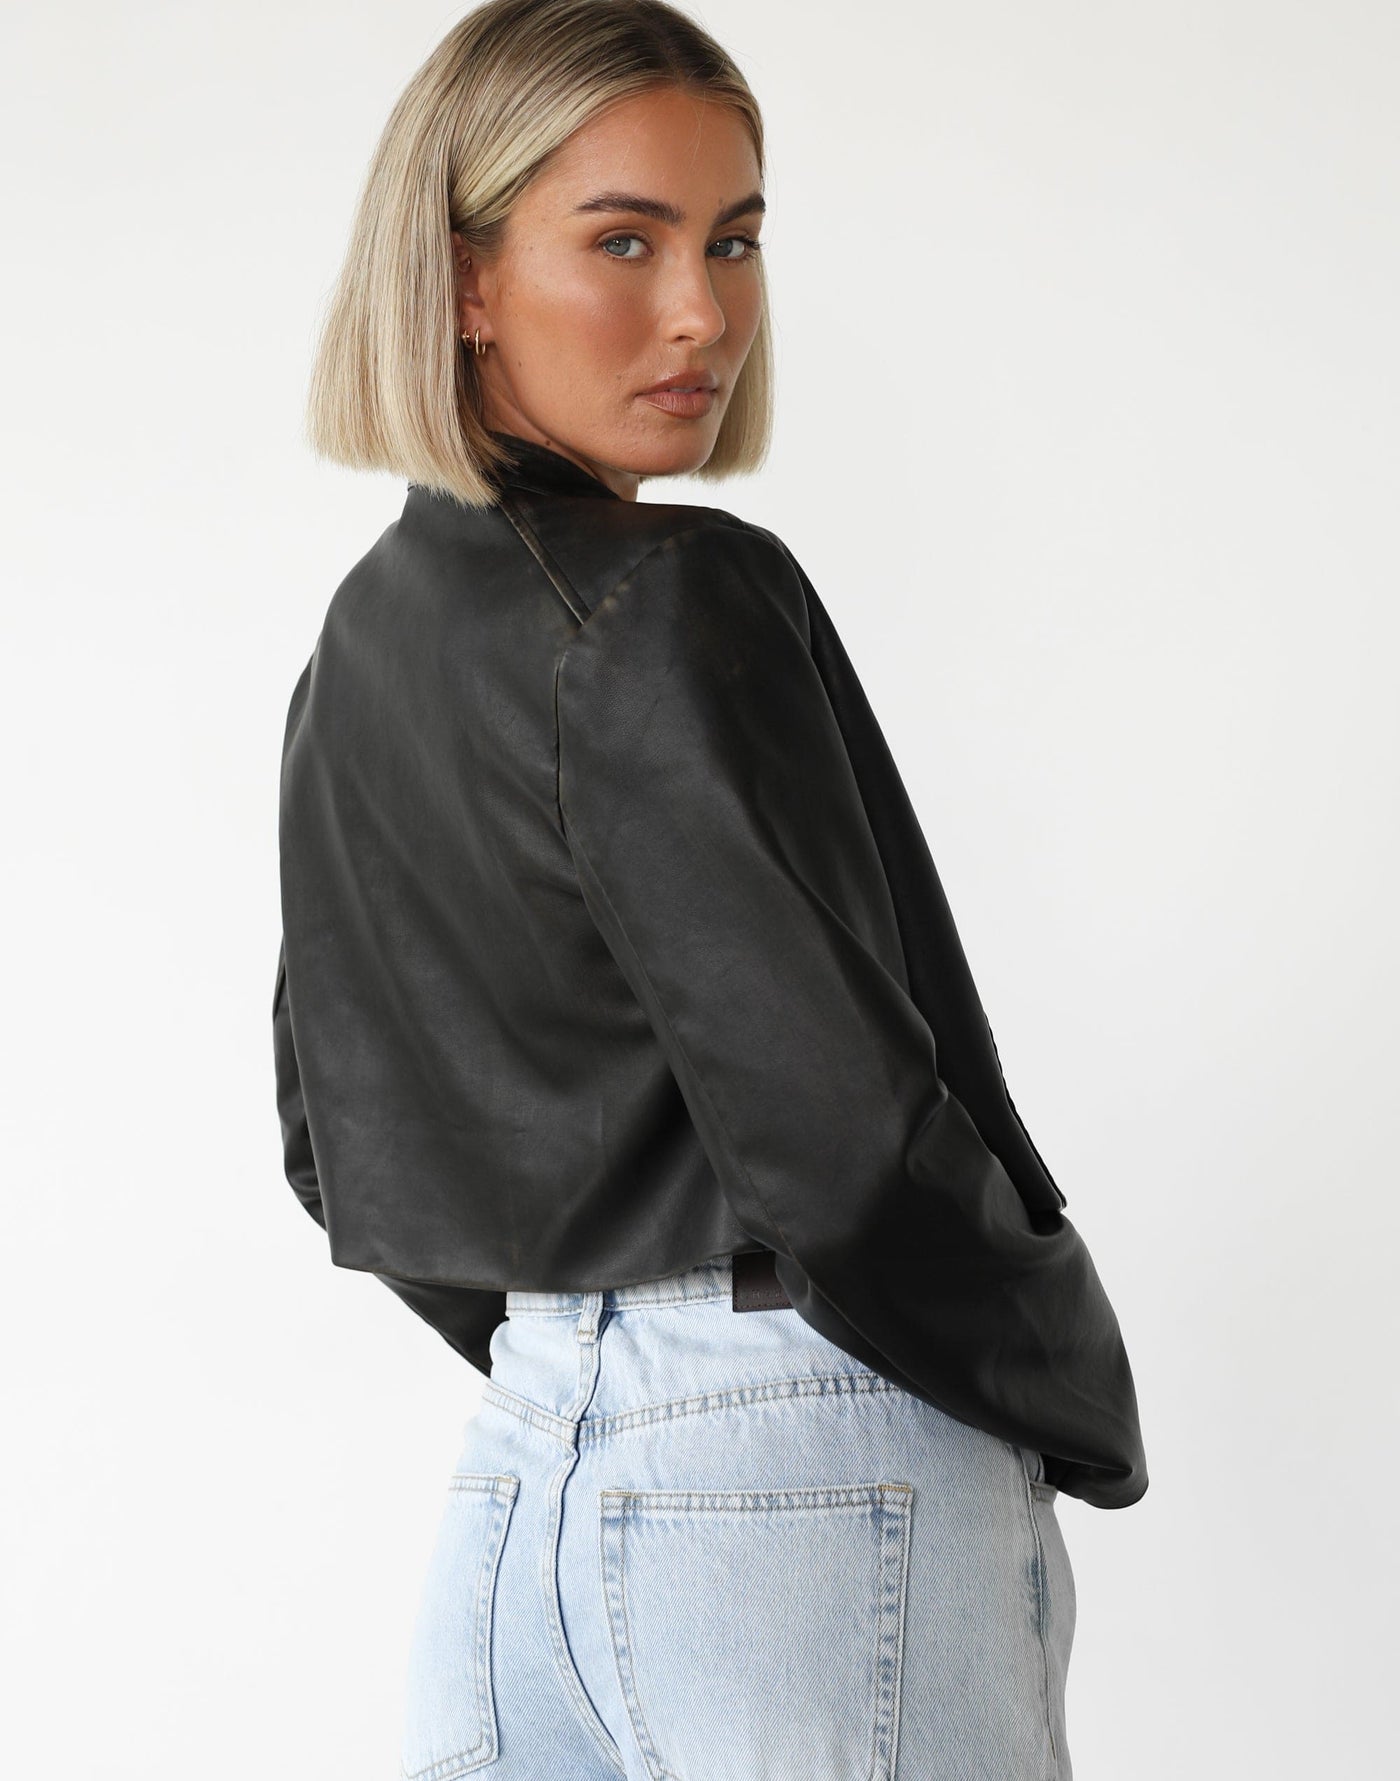 Harley Cropped Jacket (Black) - Cropped Black Faux Leather Jacket - Women's Outerwear - Charcoal Clothing